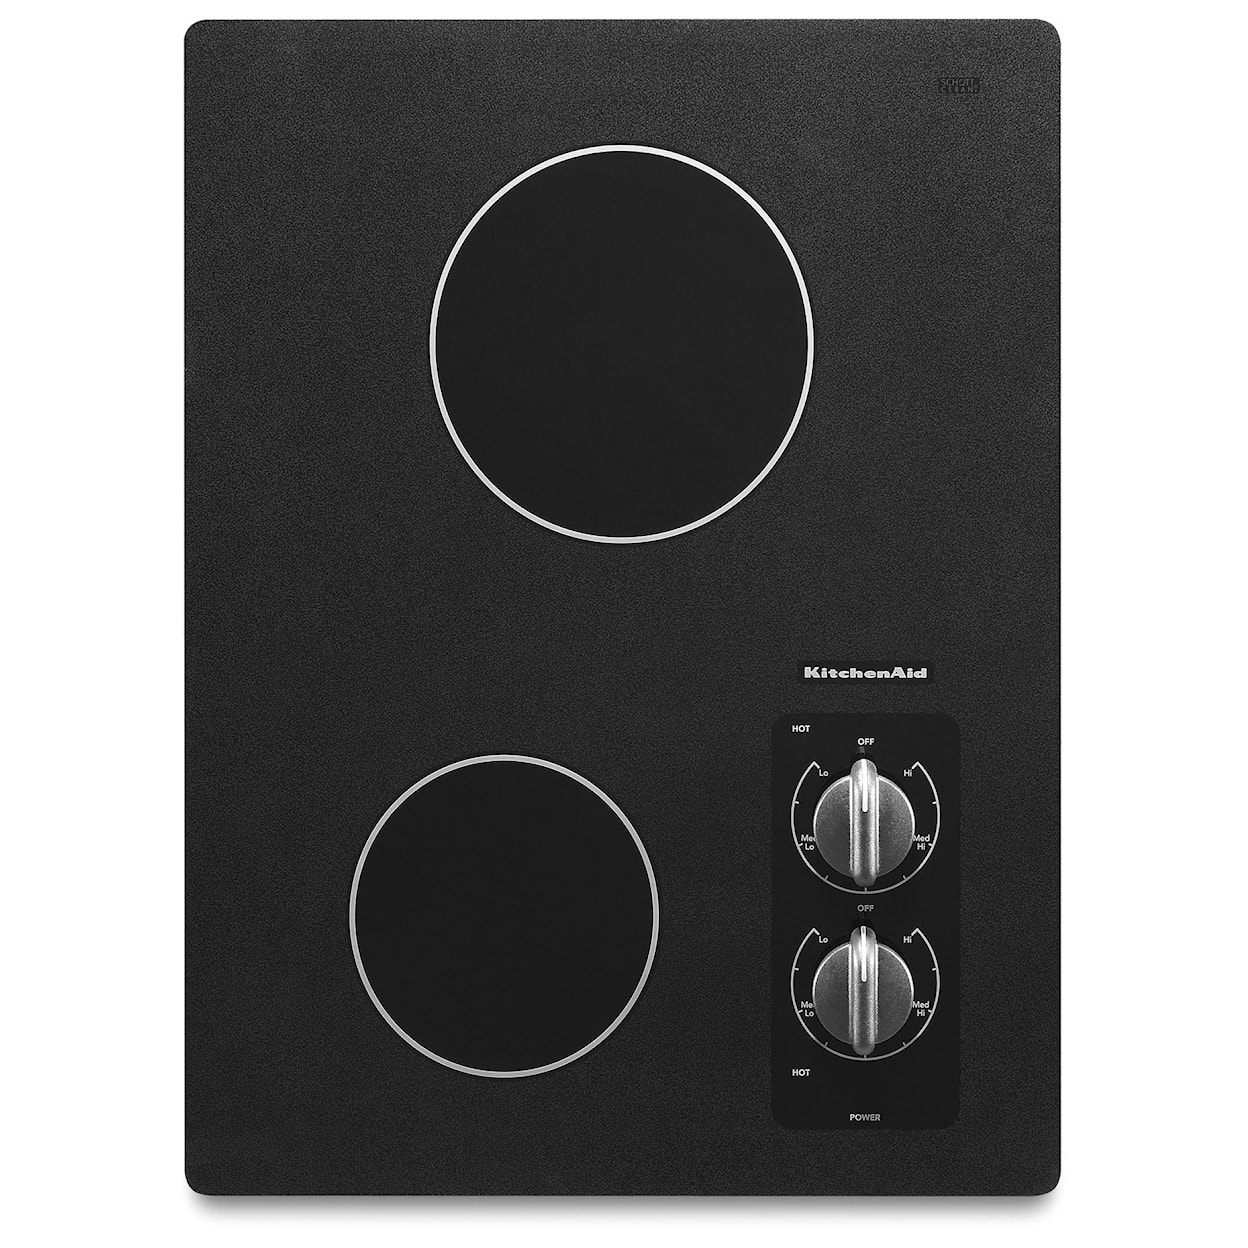 KitchenAid Electric Cooktops 15" Built-In Electric Cooktop